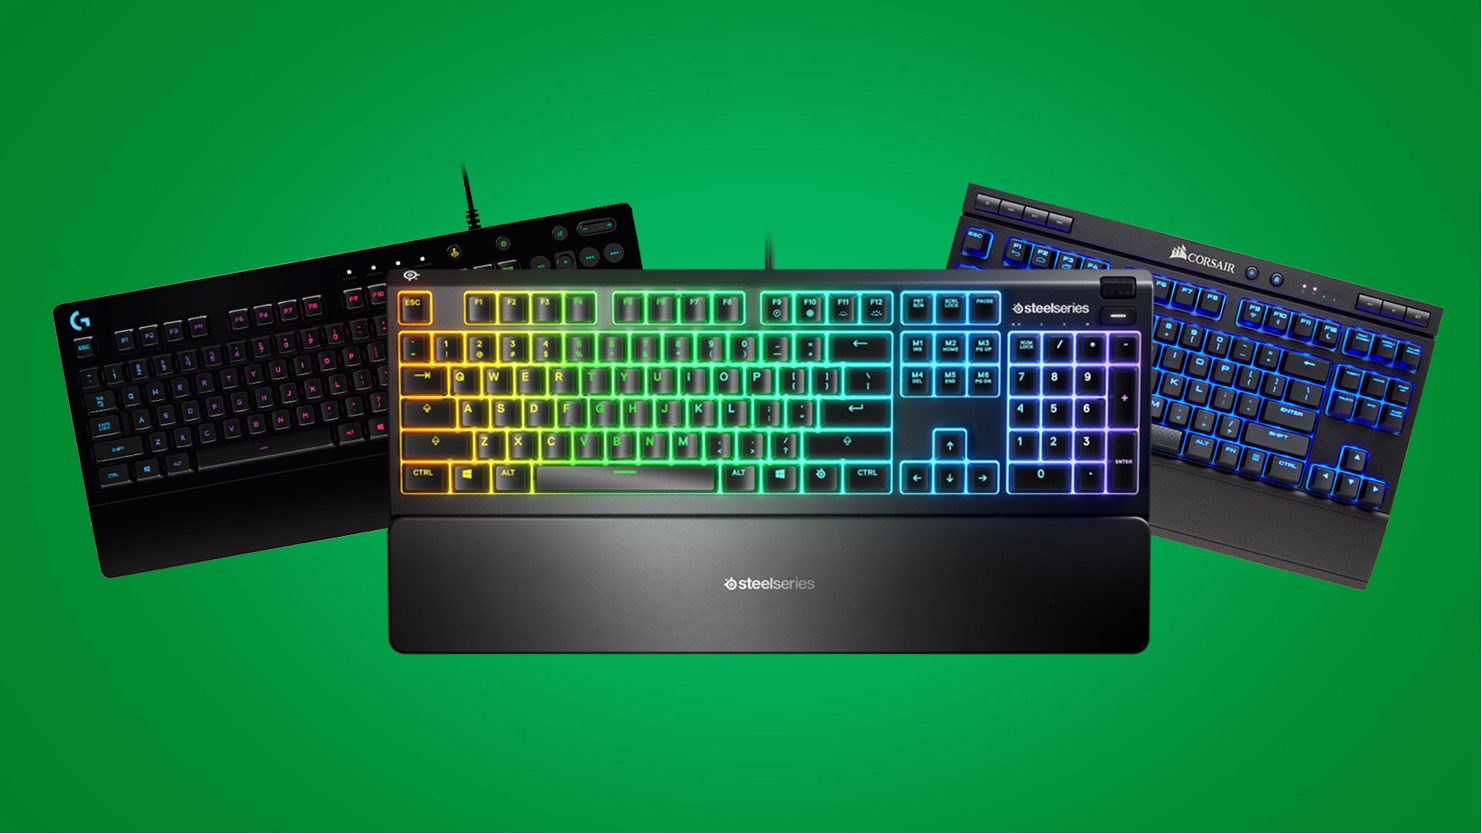 What Are Some Good, Affordable Gaming Keyboards